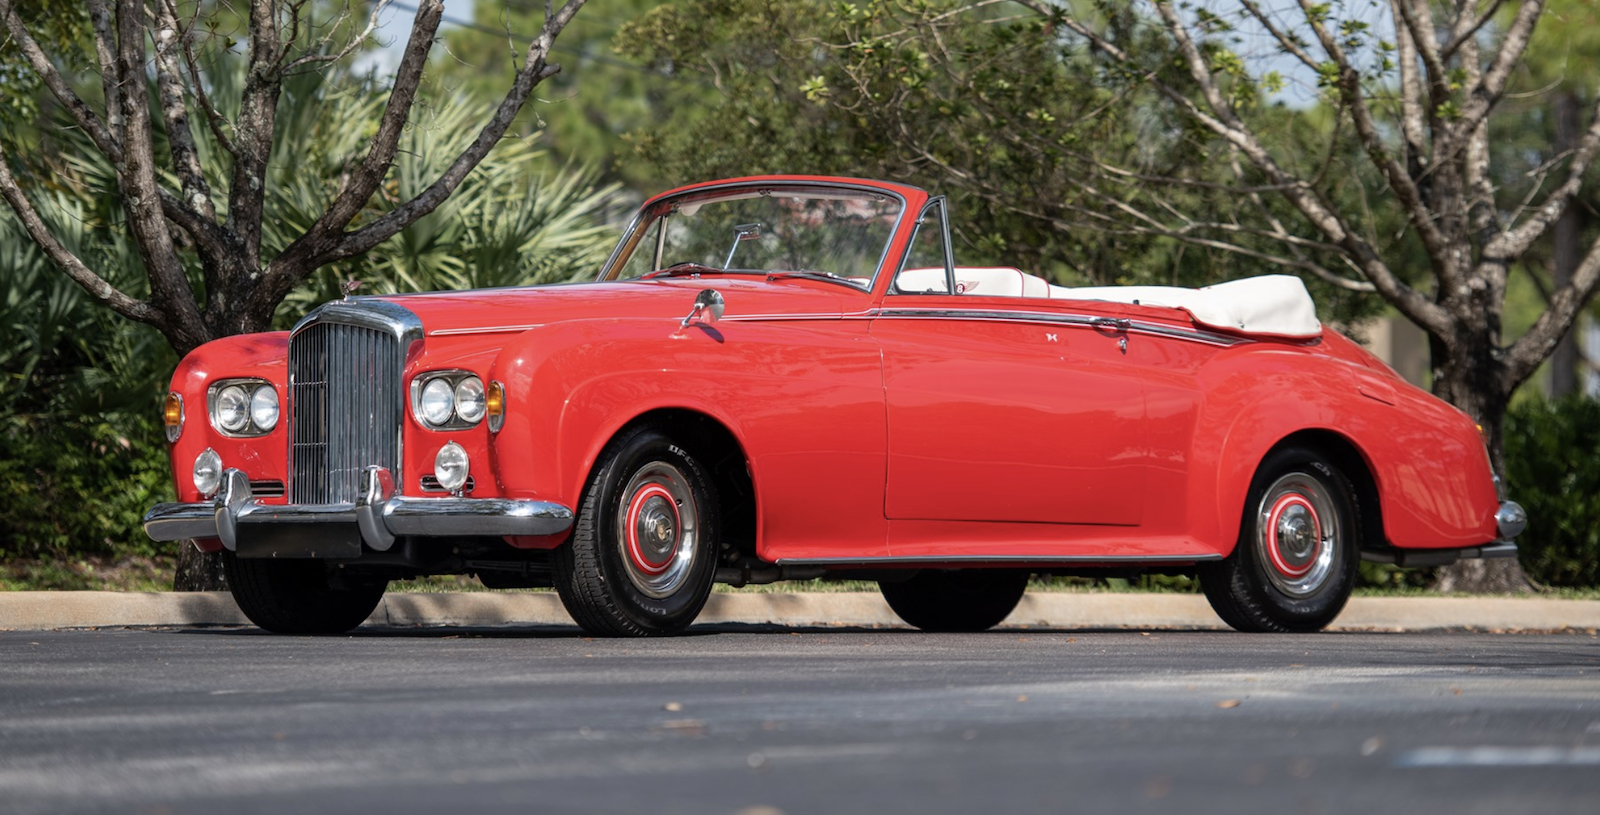 “Me Too” Victory Over Bikram Choudhury Means Bonanza of Rolls Royces At Auction